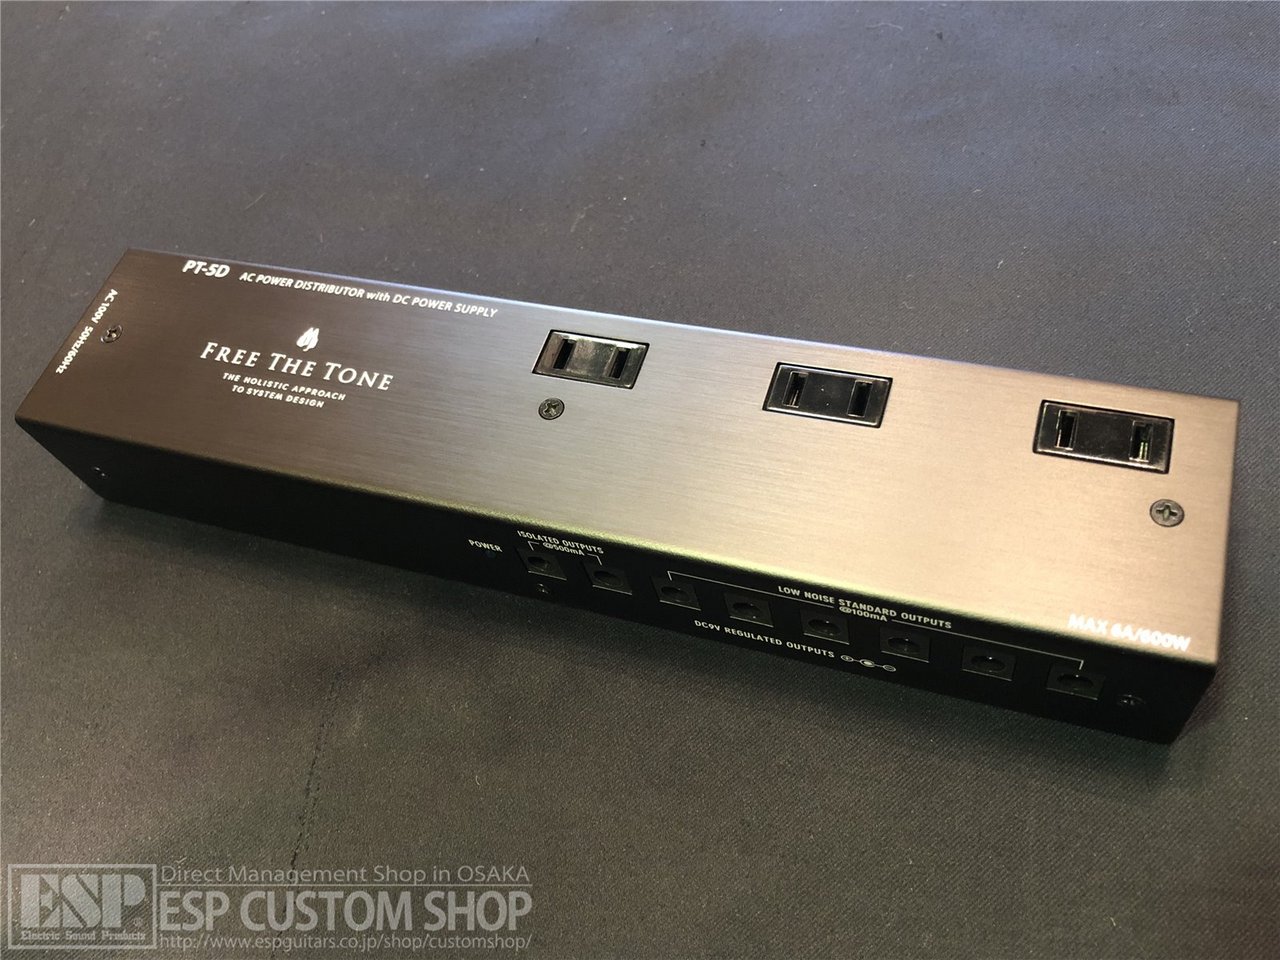 Free The Tone PT-5D AC POWER DISTRIBUTOR with DC POWER SUPPLY